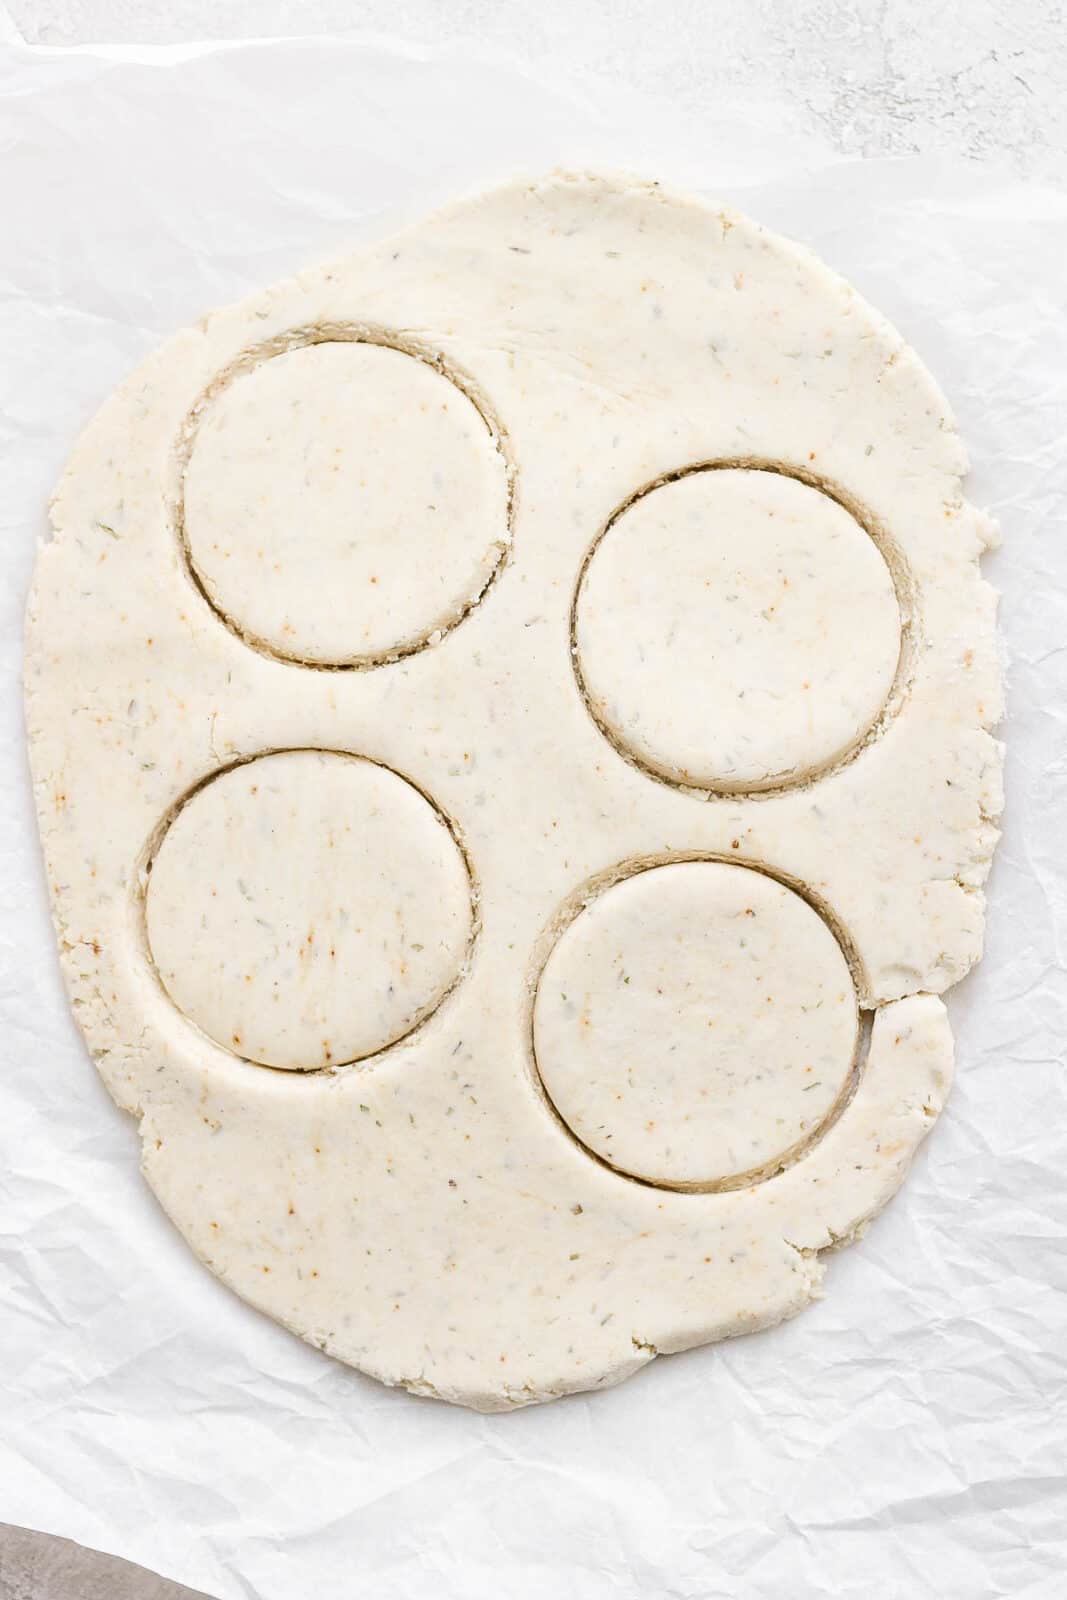 Four biscuits cut into the gluten free biscuit dough.